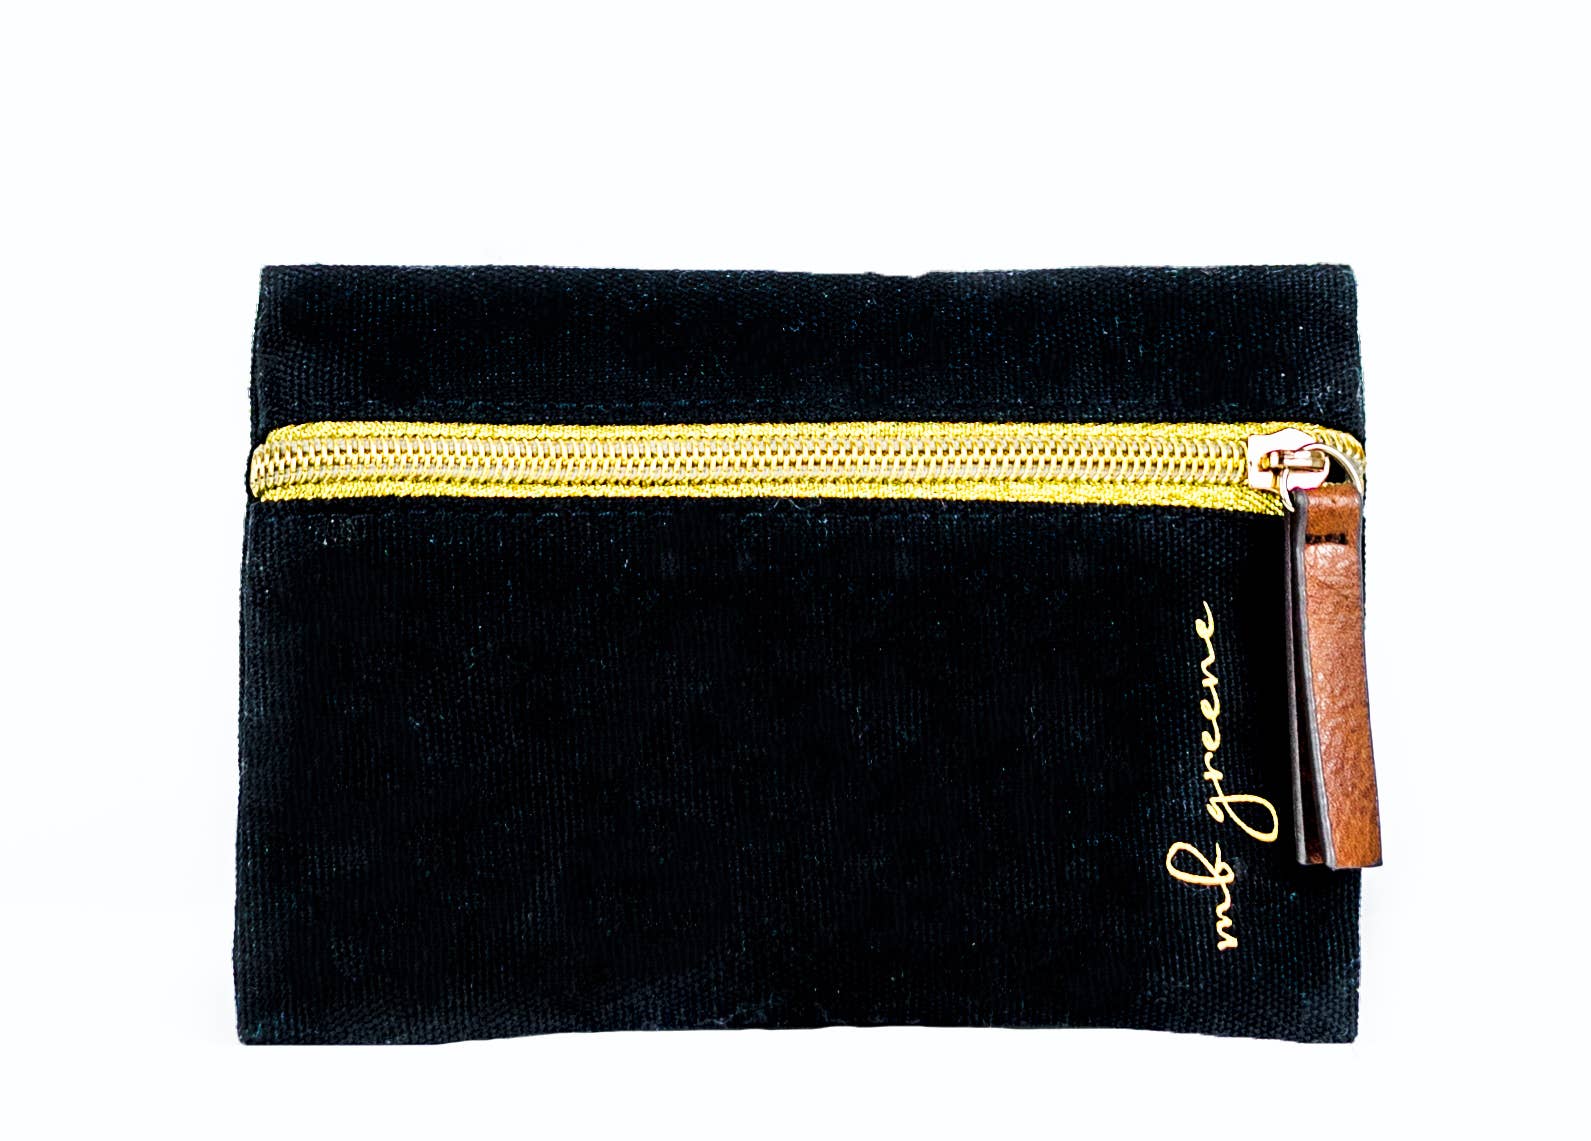 mb greene - Be Clear Collection, Privacy Pouch, Black/Gold